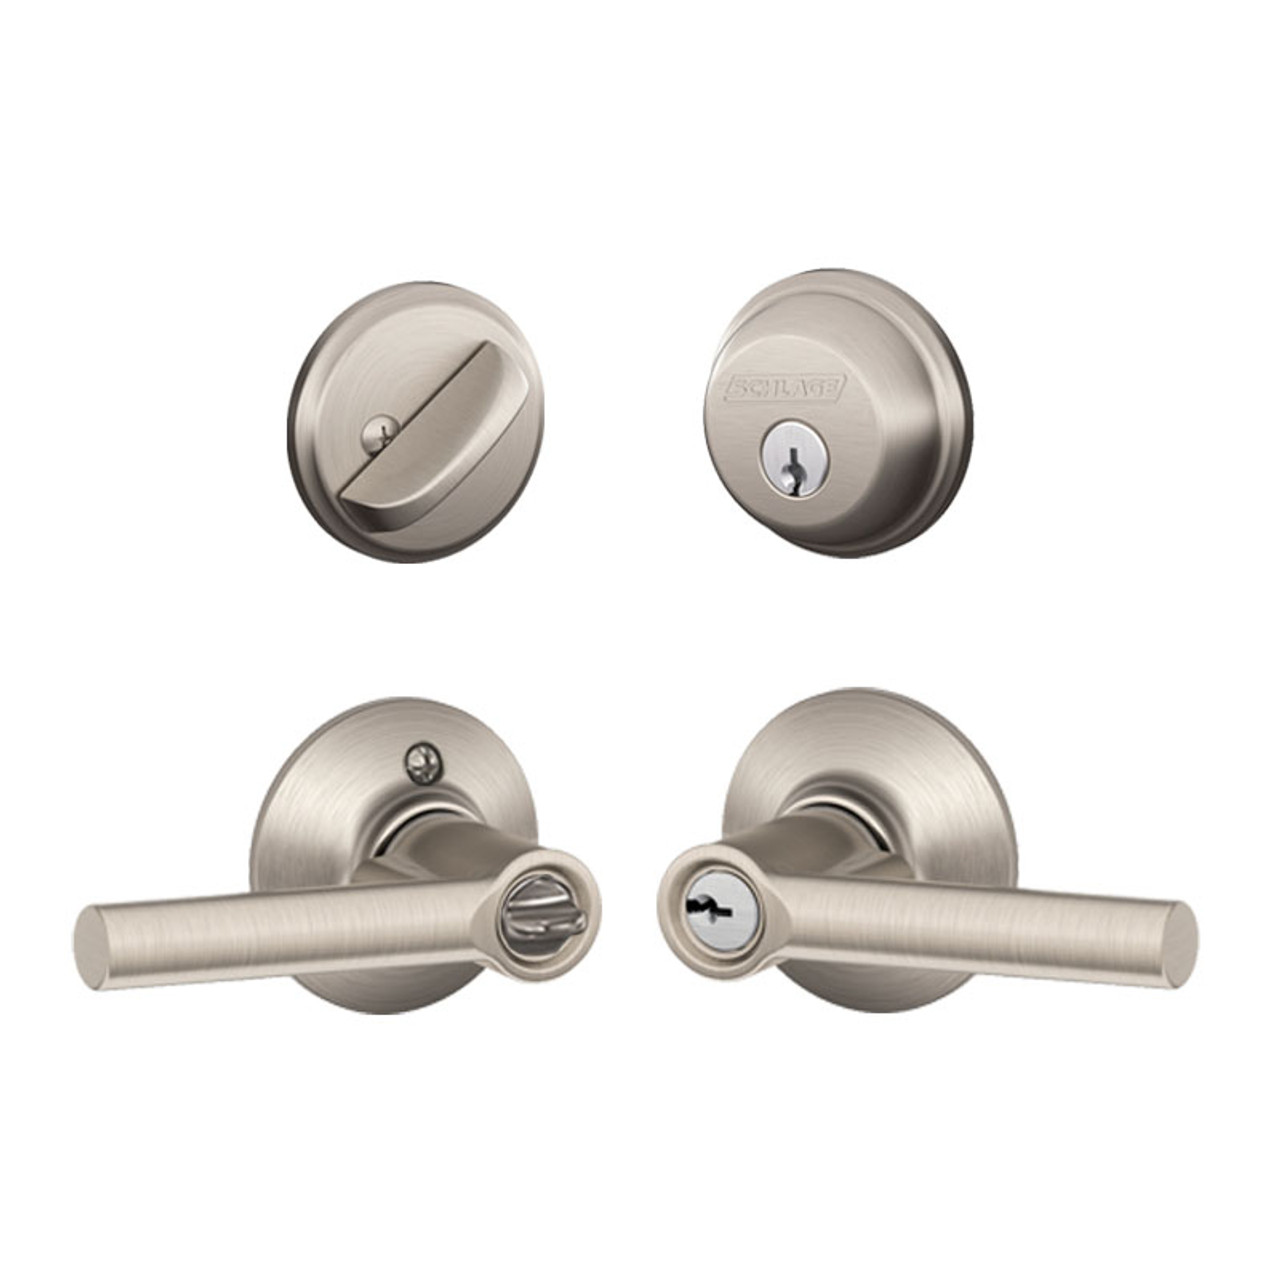 Schlage / Broadway Lever / F51A Keyed Entry with B60 Single Cylinder  Deadbolt Combo Pack / Satin Nickel / FB50BRW619